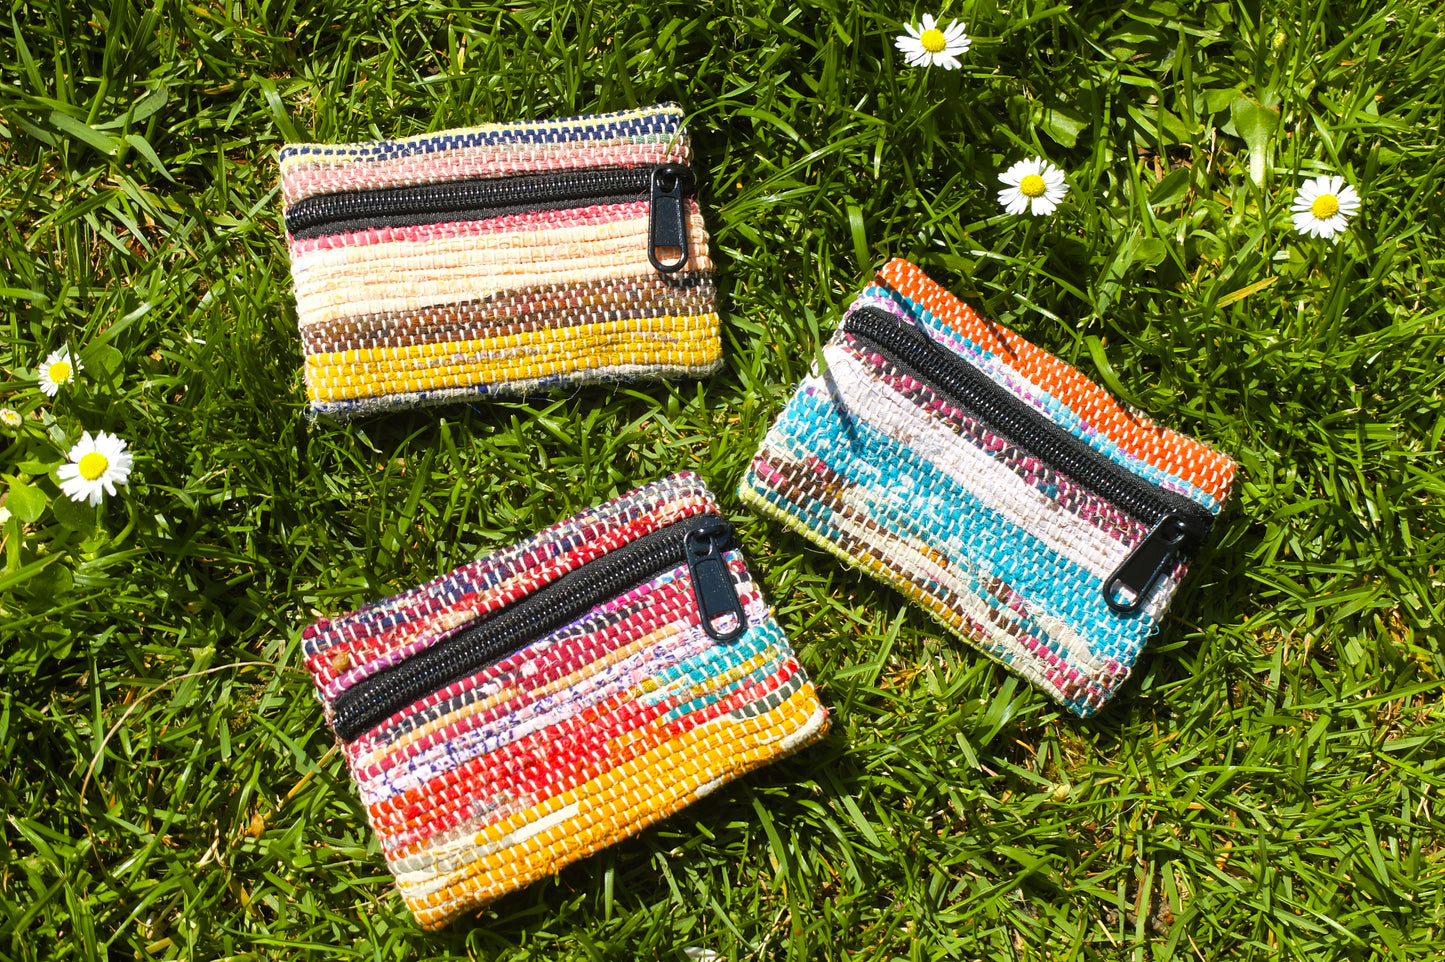 Upcycled Coin Purses